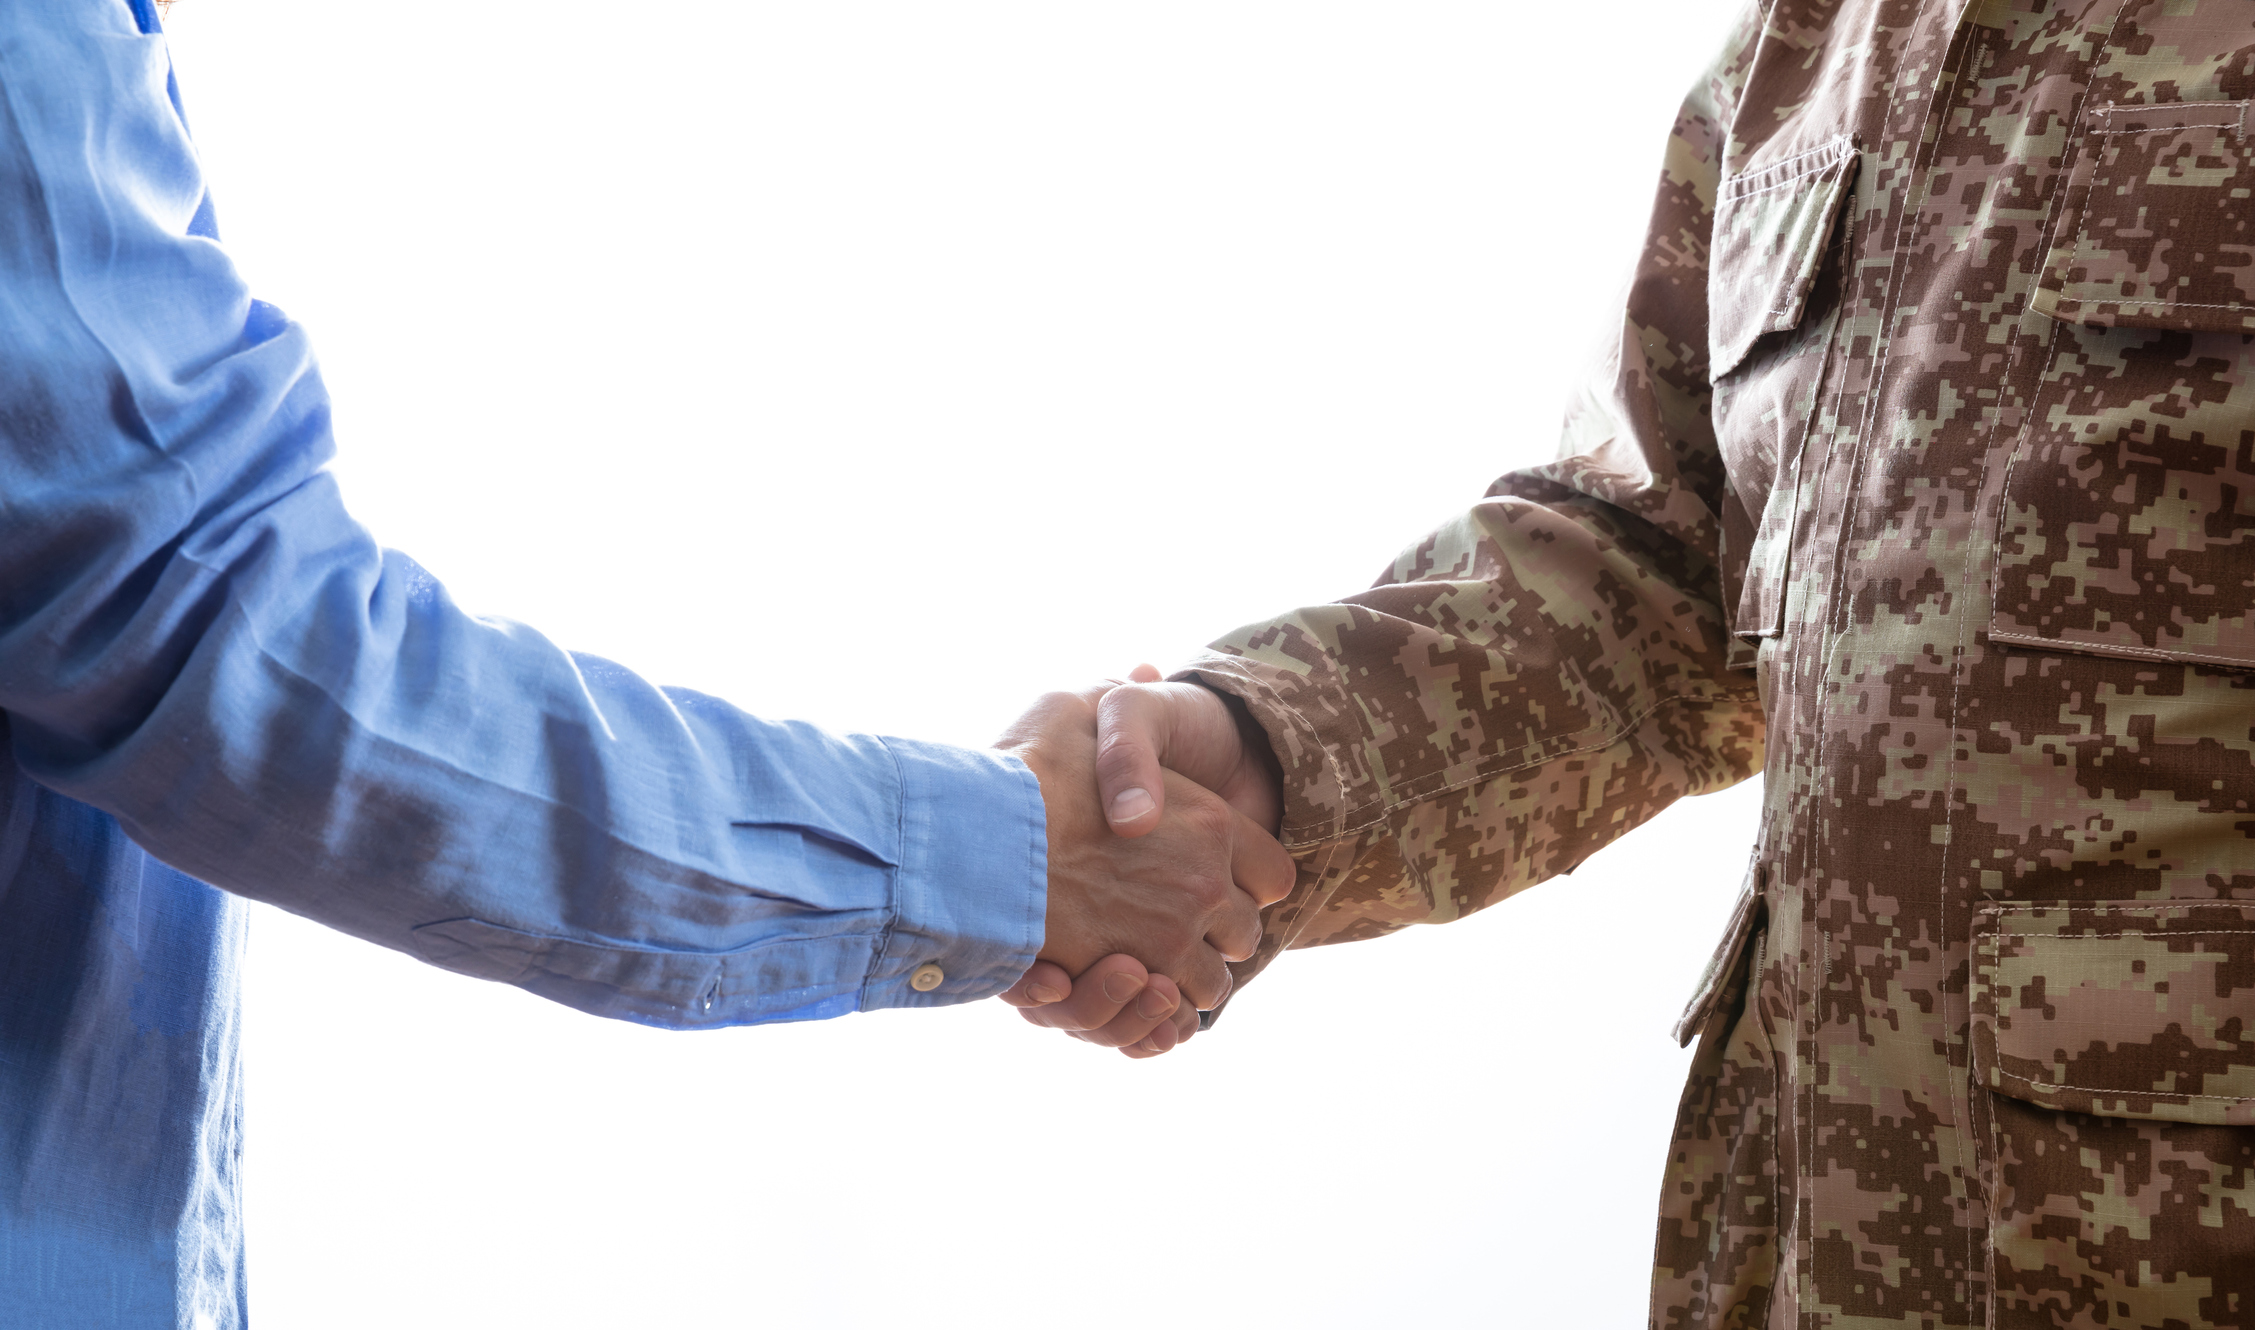 A close-up image of a handshake between a veteran wearing military fatigues and a civilian wearing a light blue button-down shirt.